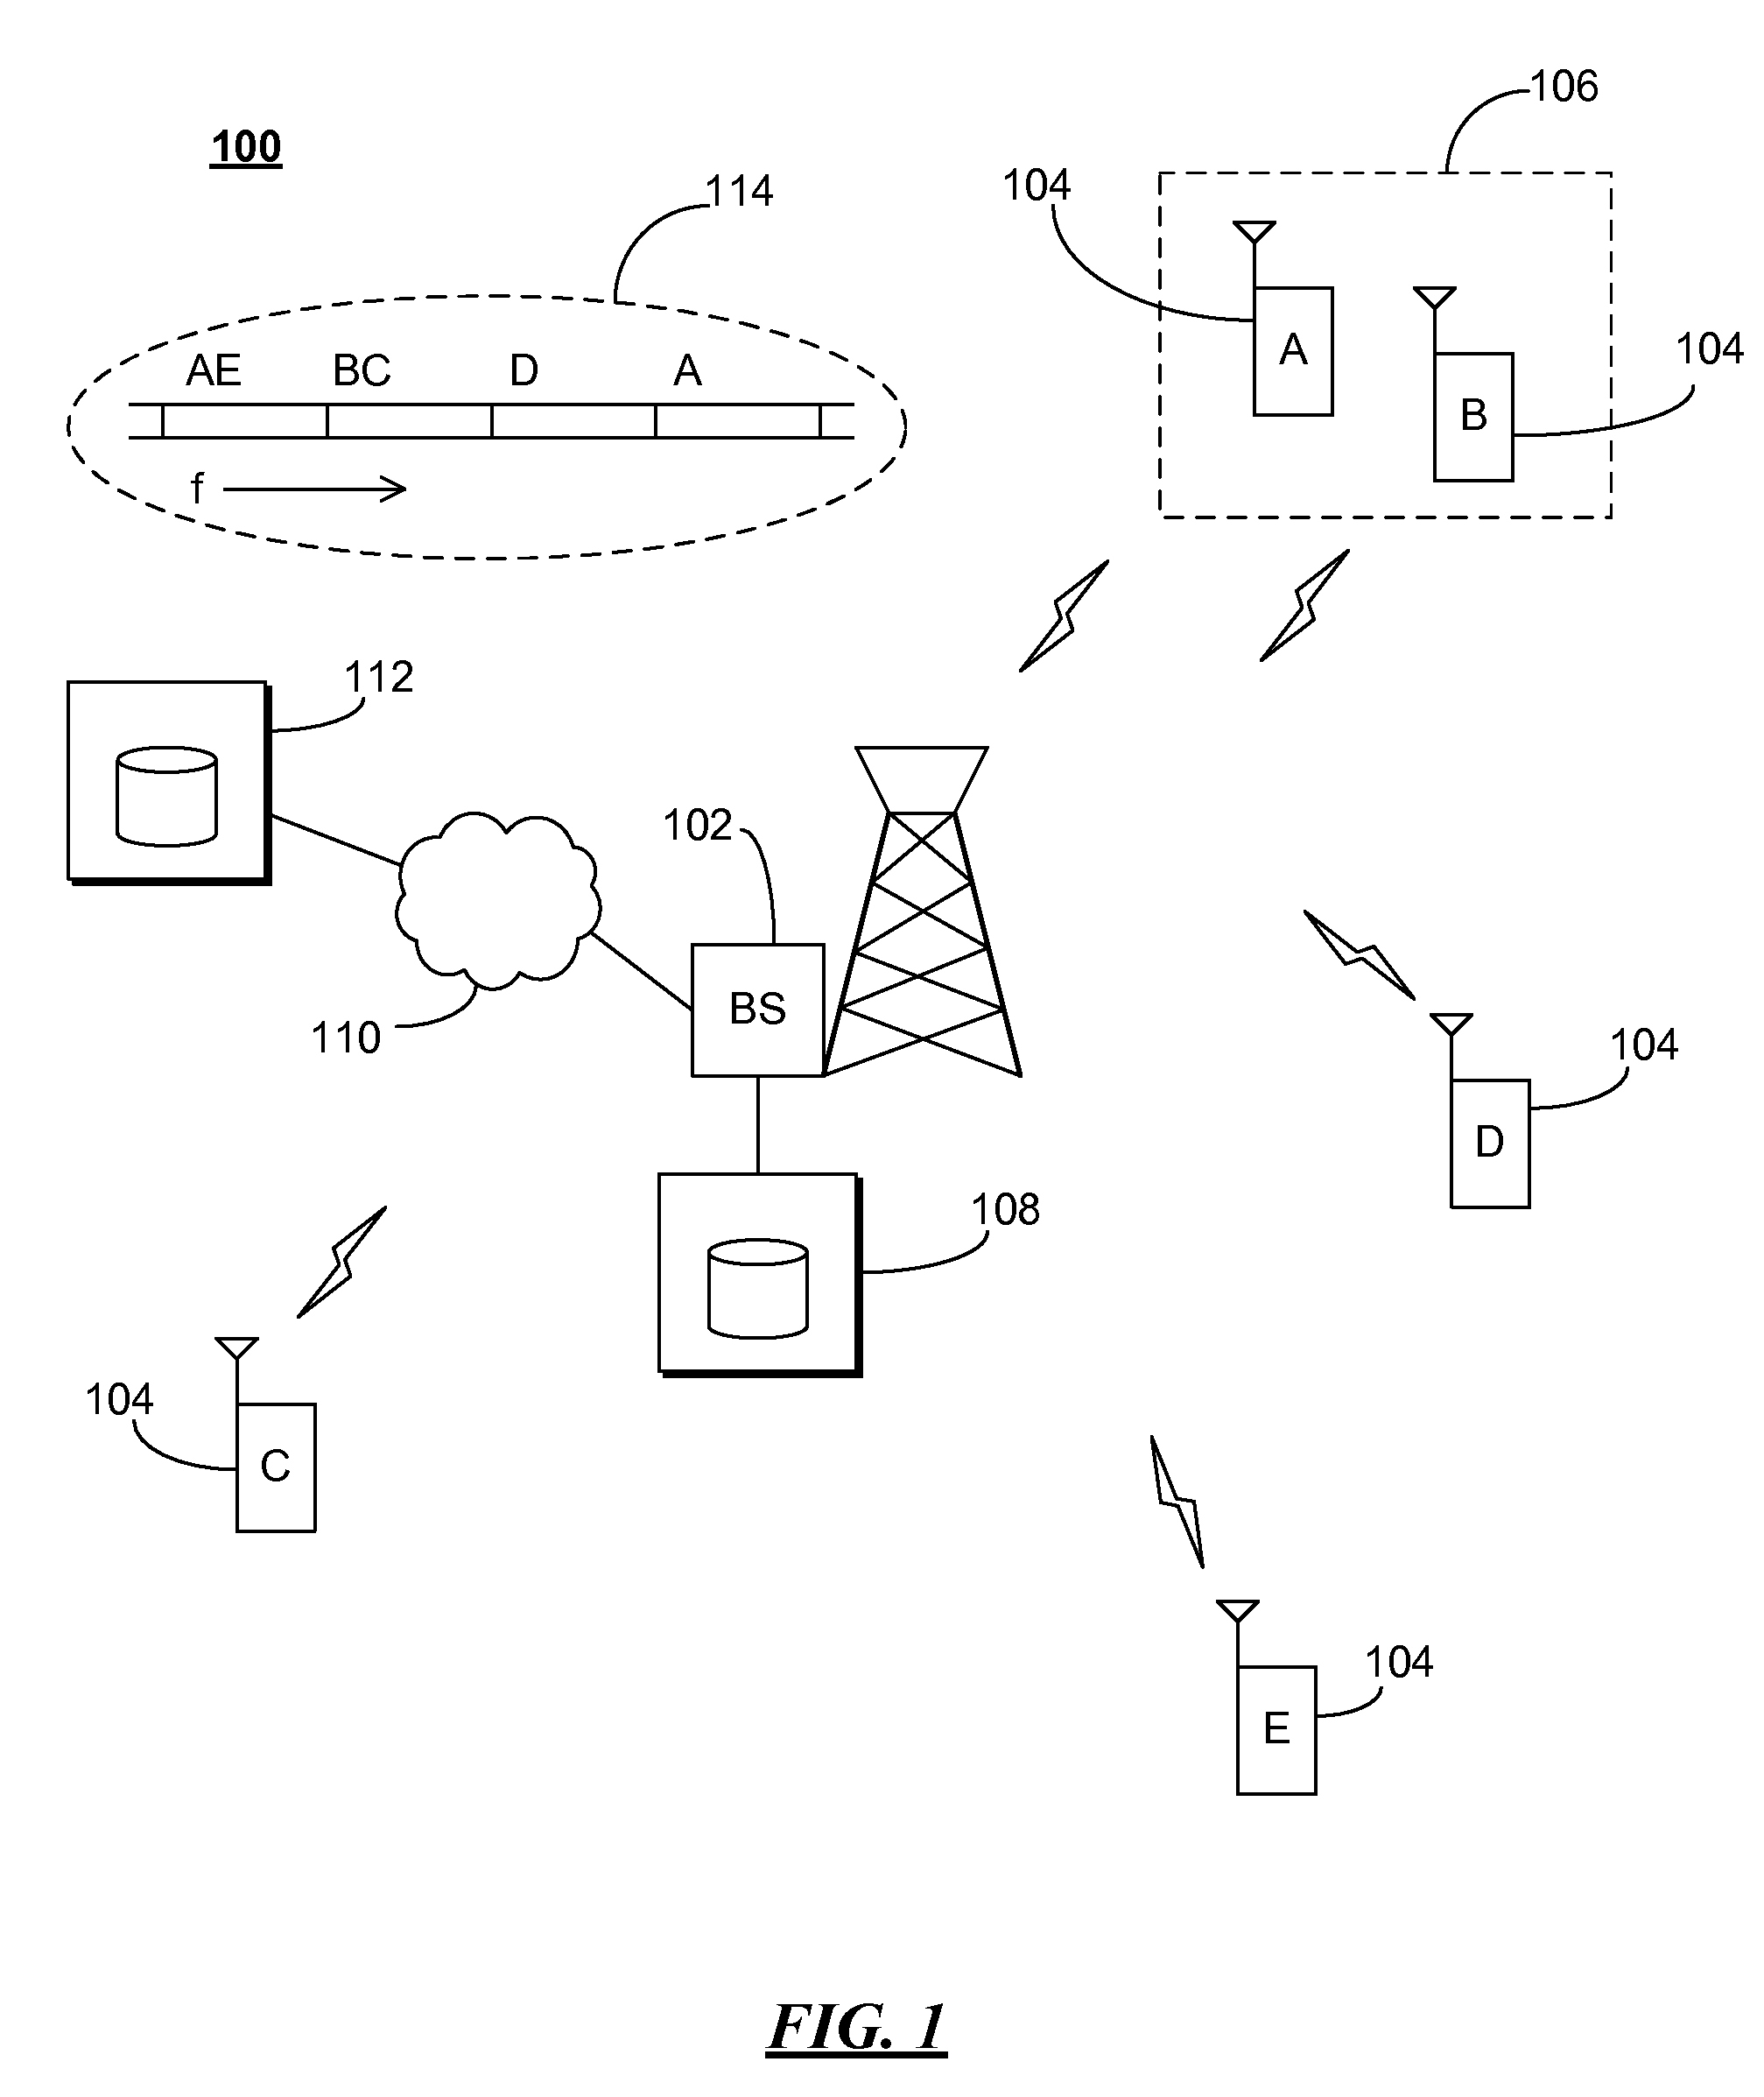 Narrowband system and method for defining narrowband channels in unused wideband channels